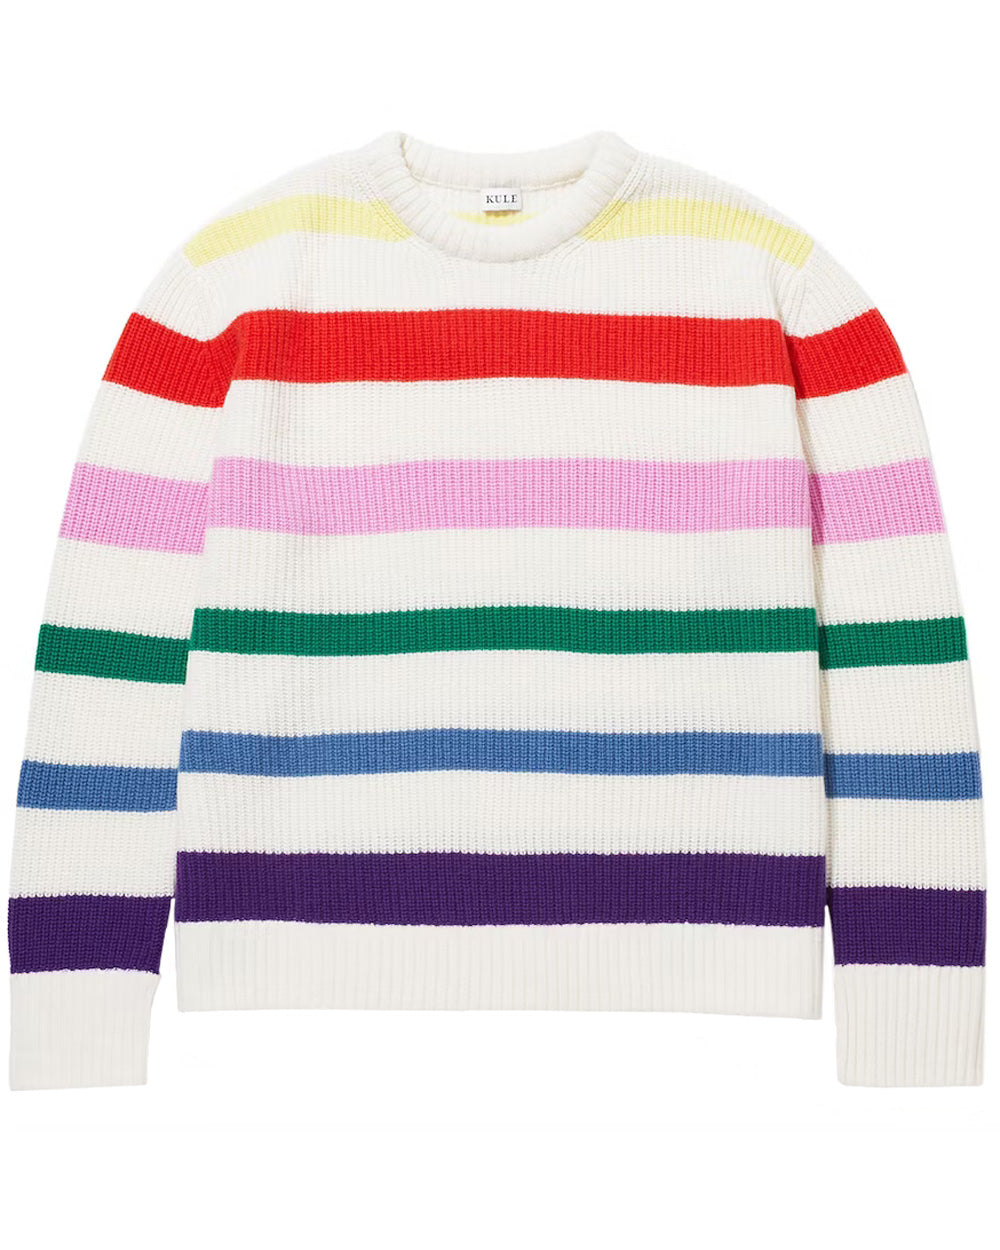 The Alden Long Sleeve Pullover in Candy Stripe